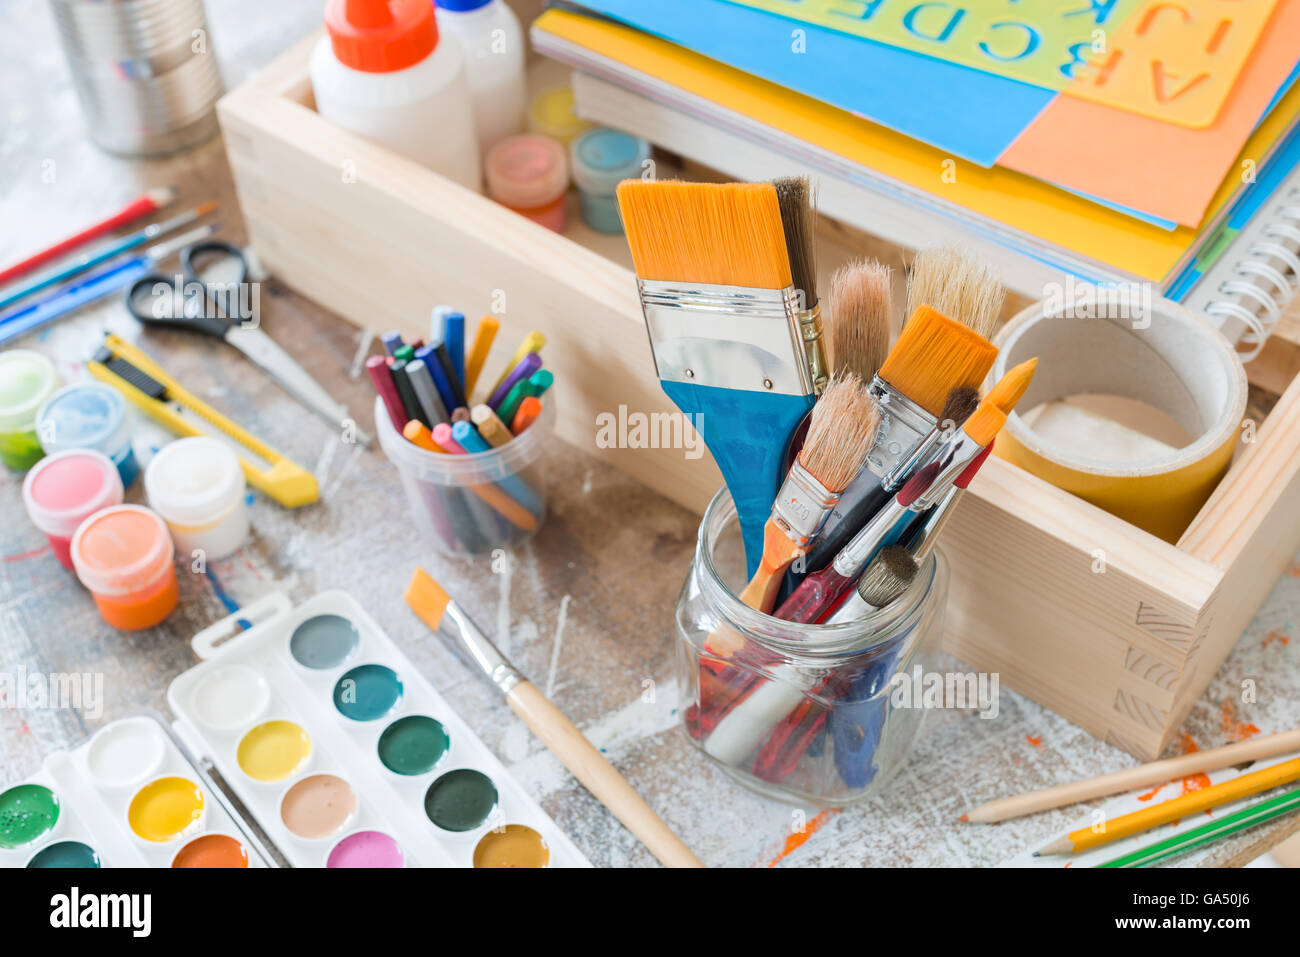 https://c8.alamy.com/comp/GA50J6/paint-brushes-and-crafting-supplies-on-the-table-in-a-workshop-GA50J6.jpg